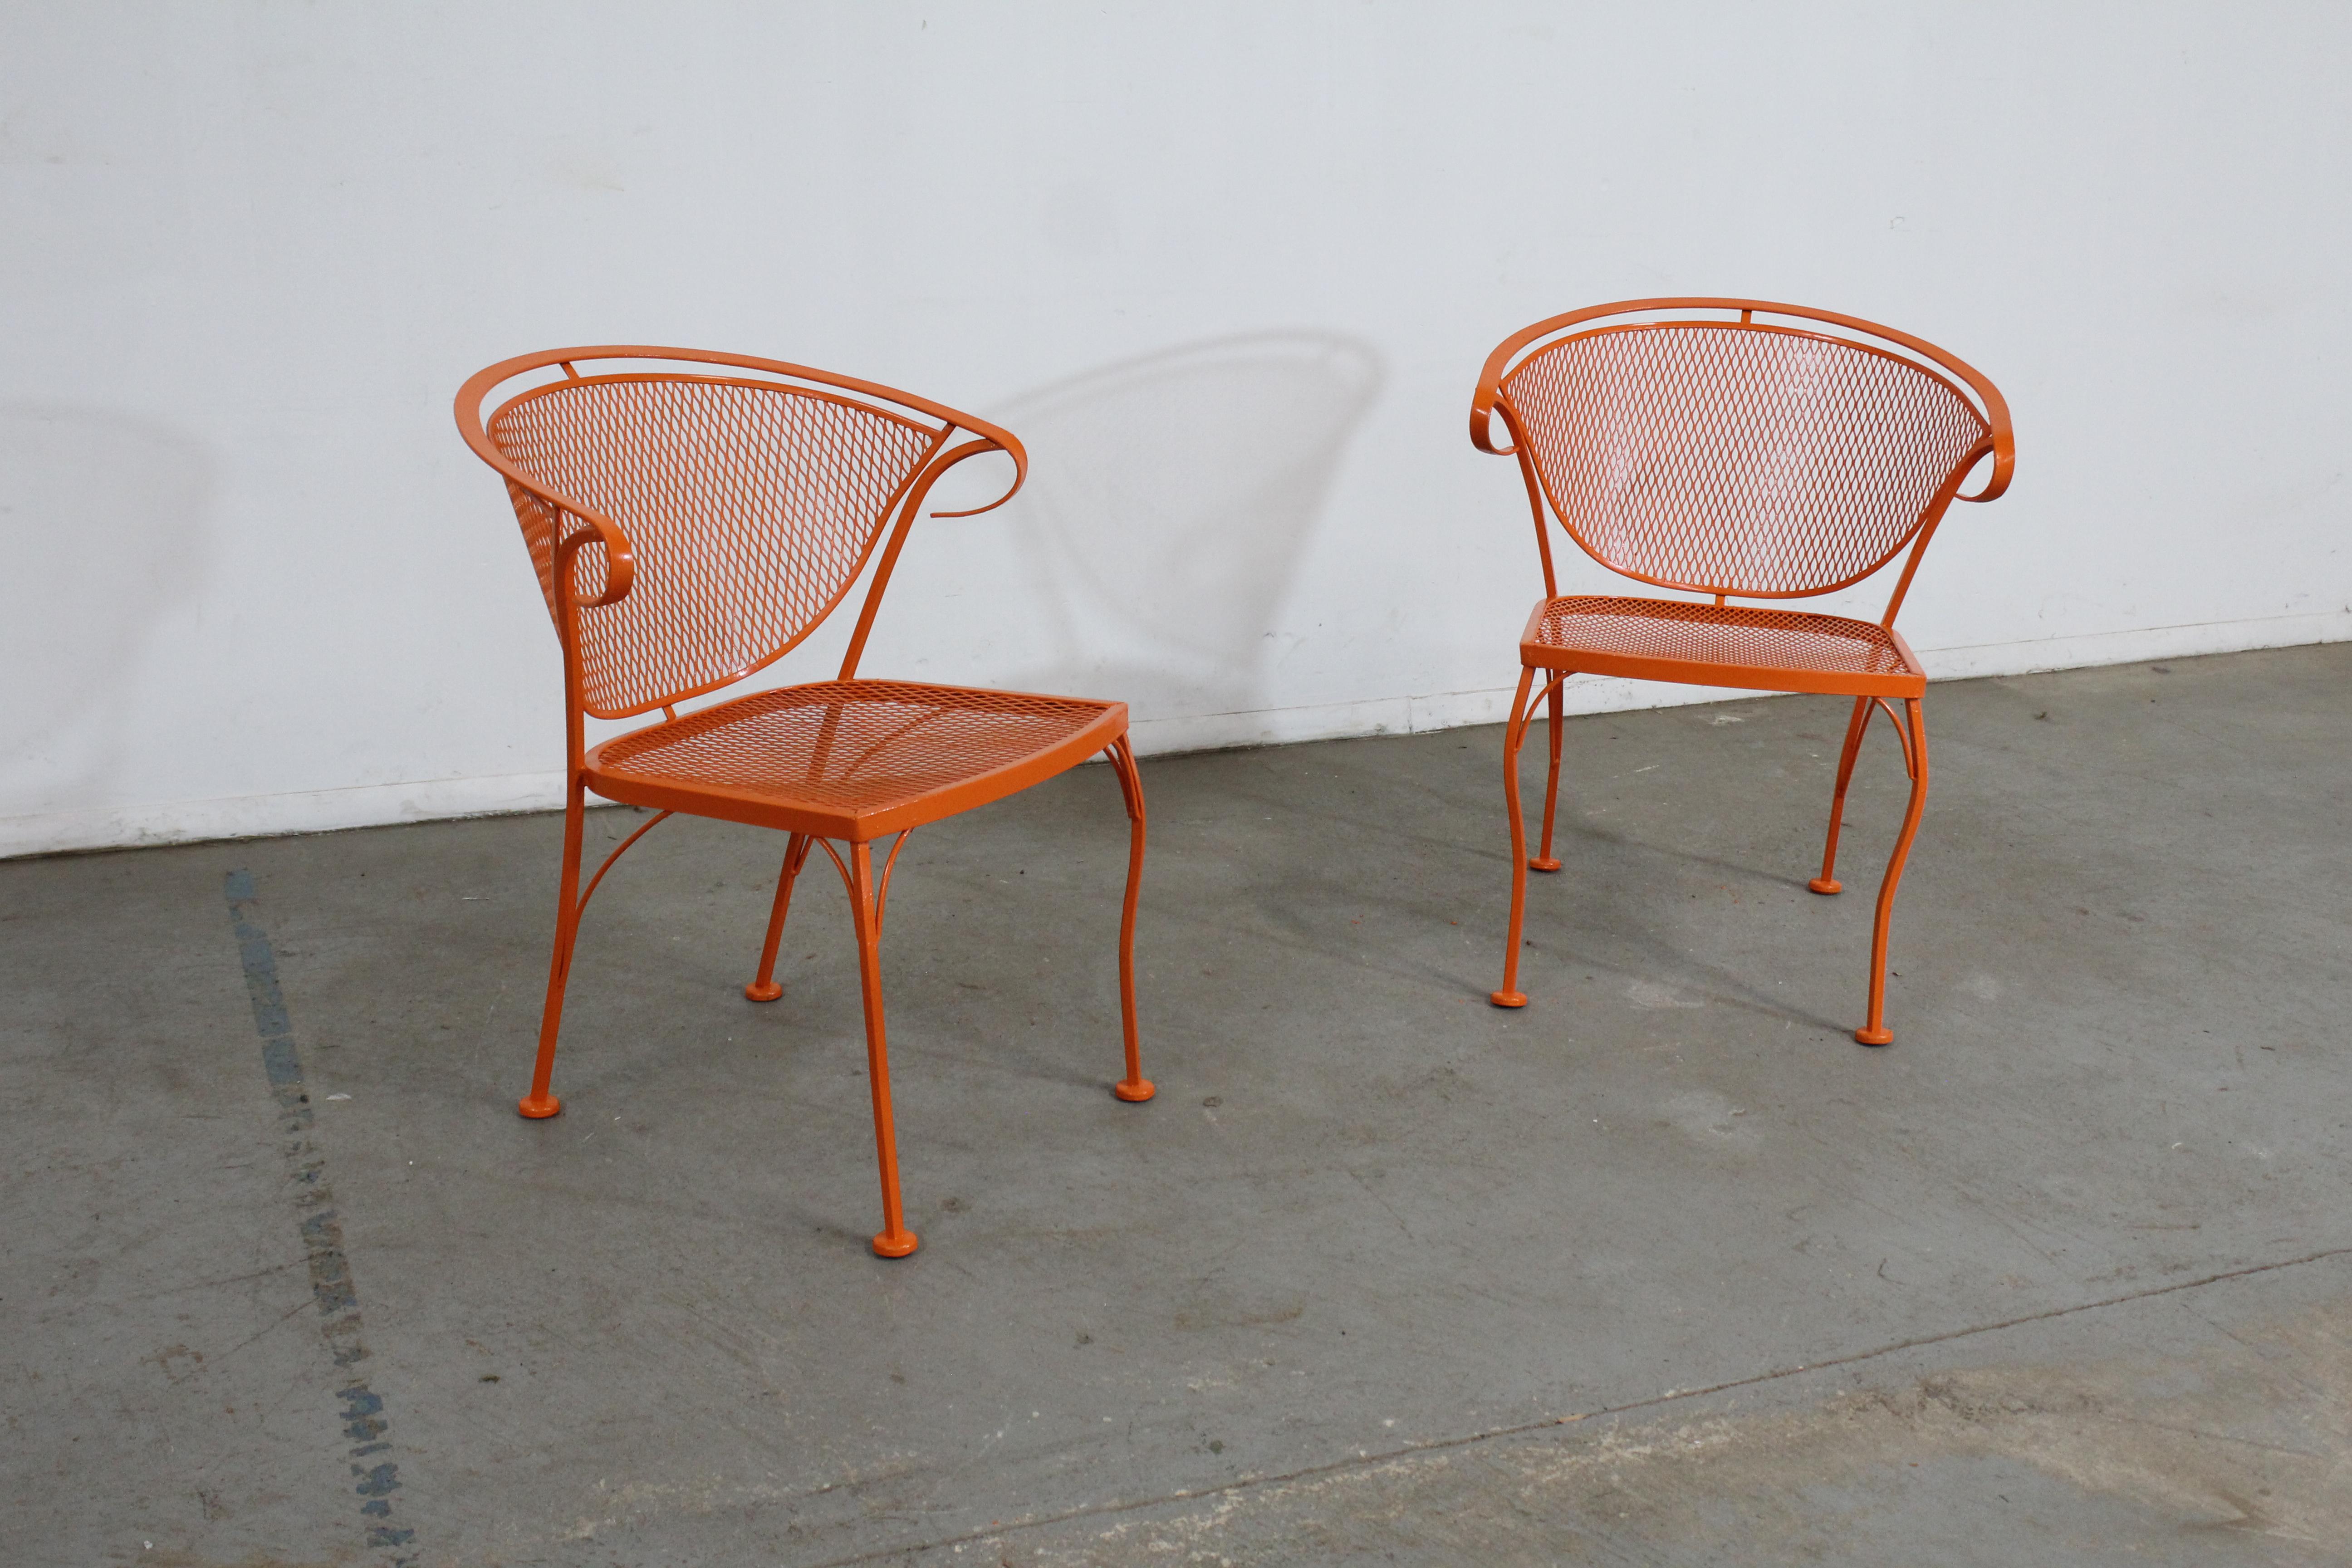 Pair of Mid-Century Modern Atomic Orange Salterini Style Outdoor Metal Curved Back Chairs Set B

Offered is a pair of Pair of Mid-Century Modern Atomic orange Outdoor Metal Curved Back Chairs, circa 1968. These chairs have been repainted in an